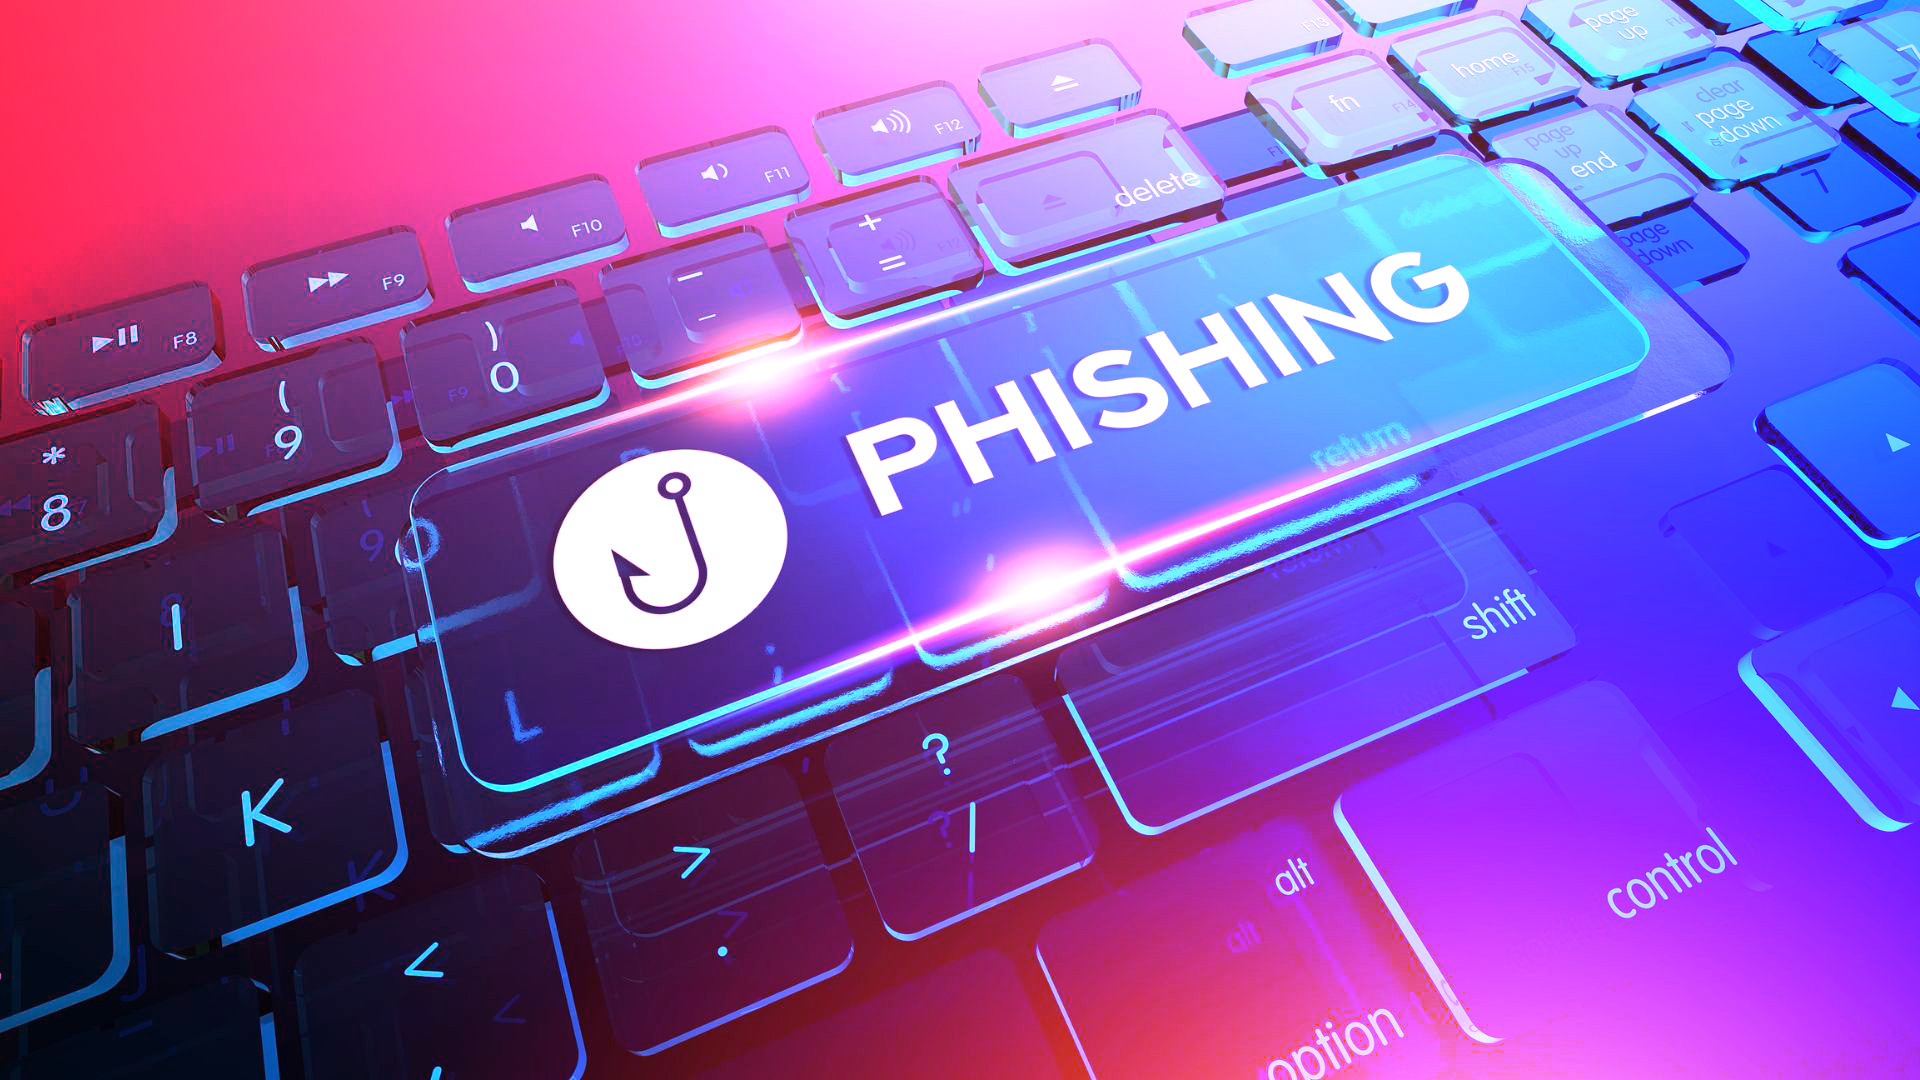 The Top 8 Phishing Scam Tactics and How to Spot Them